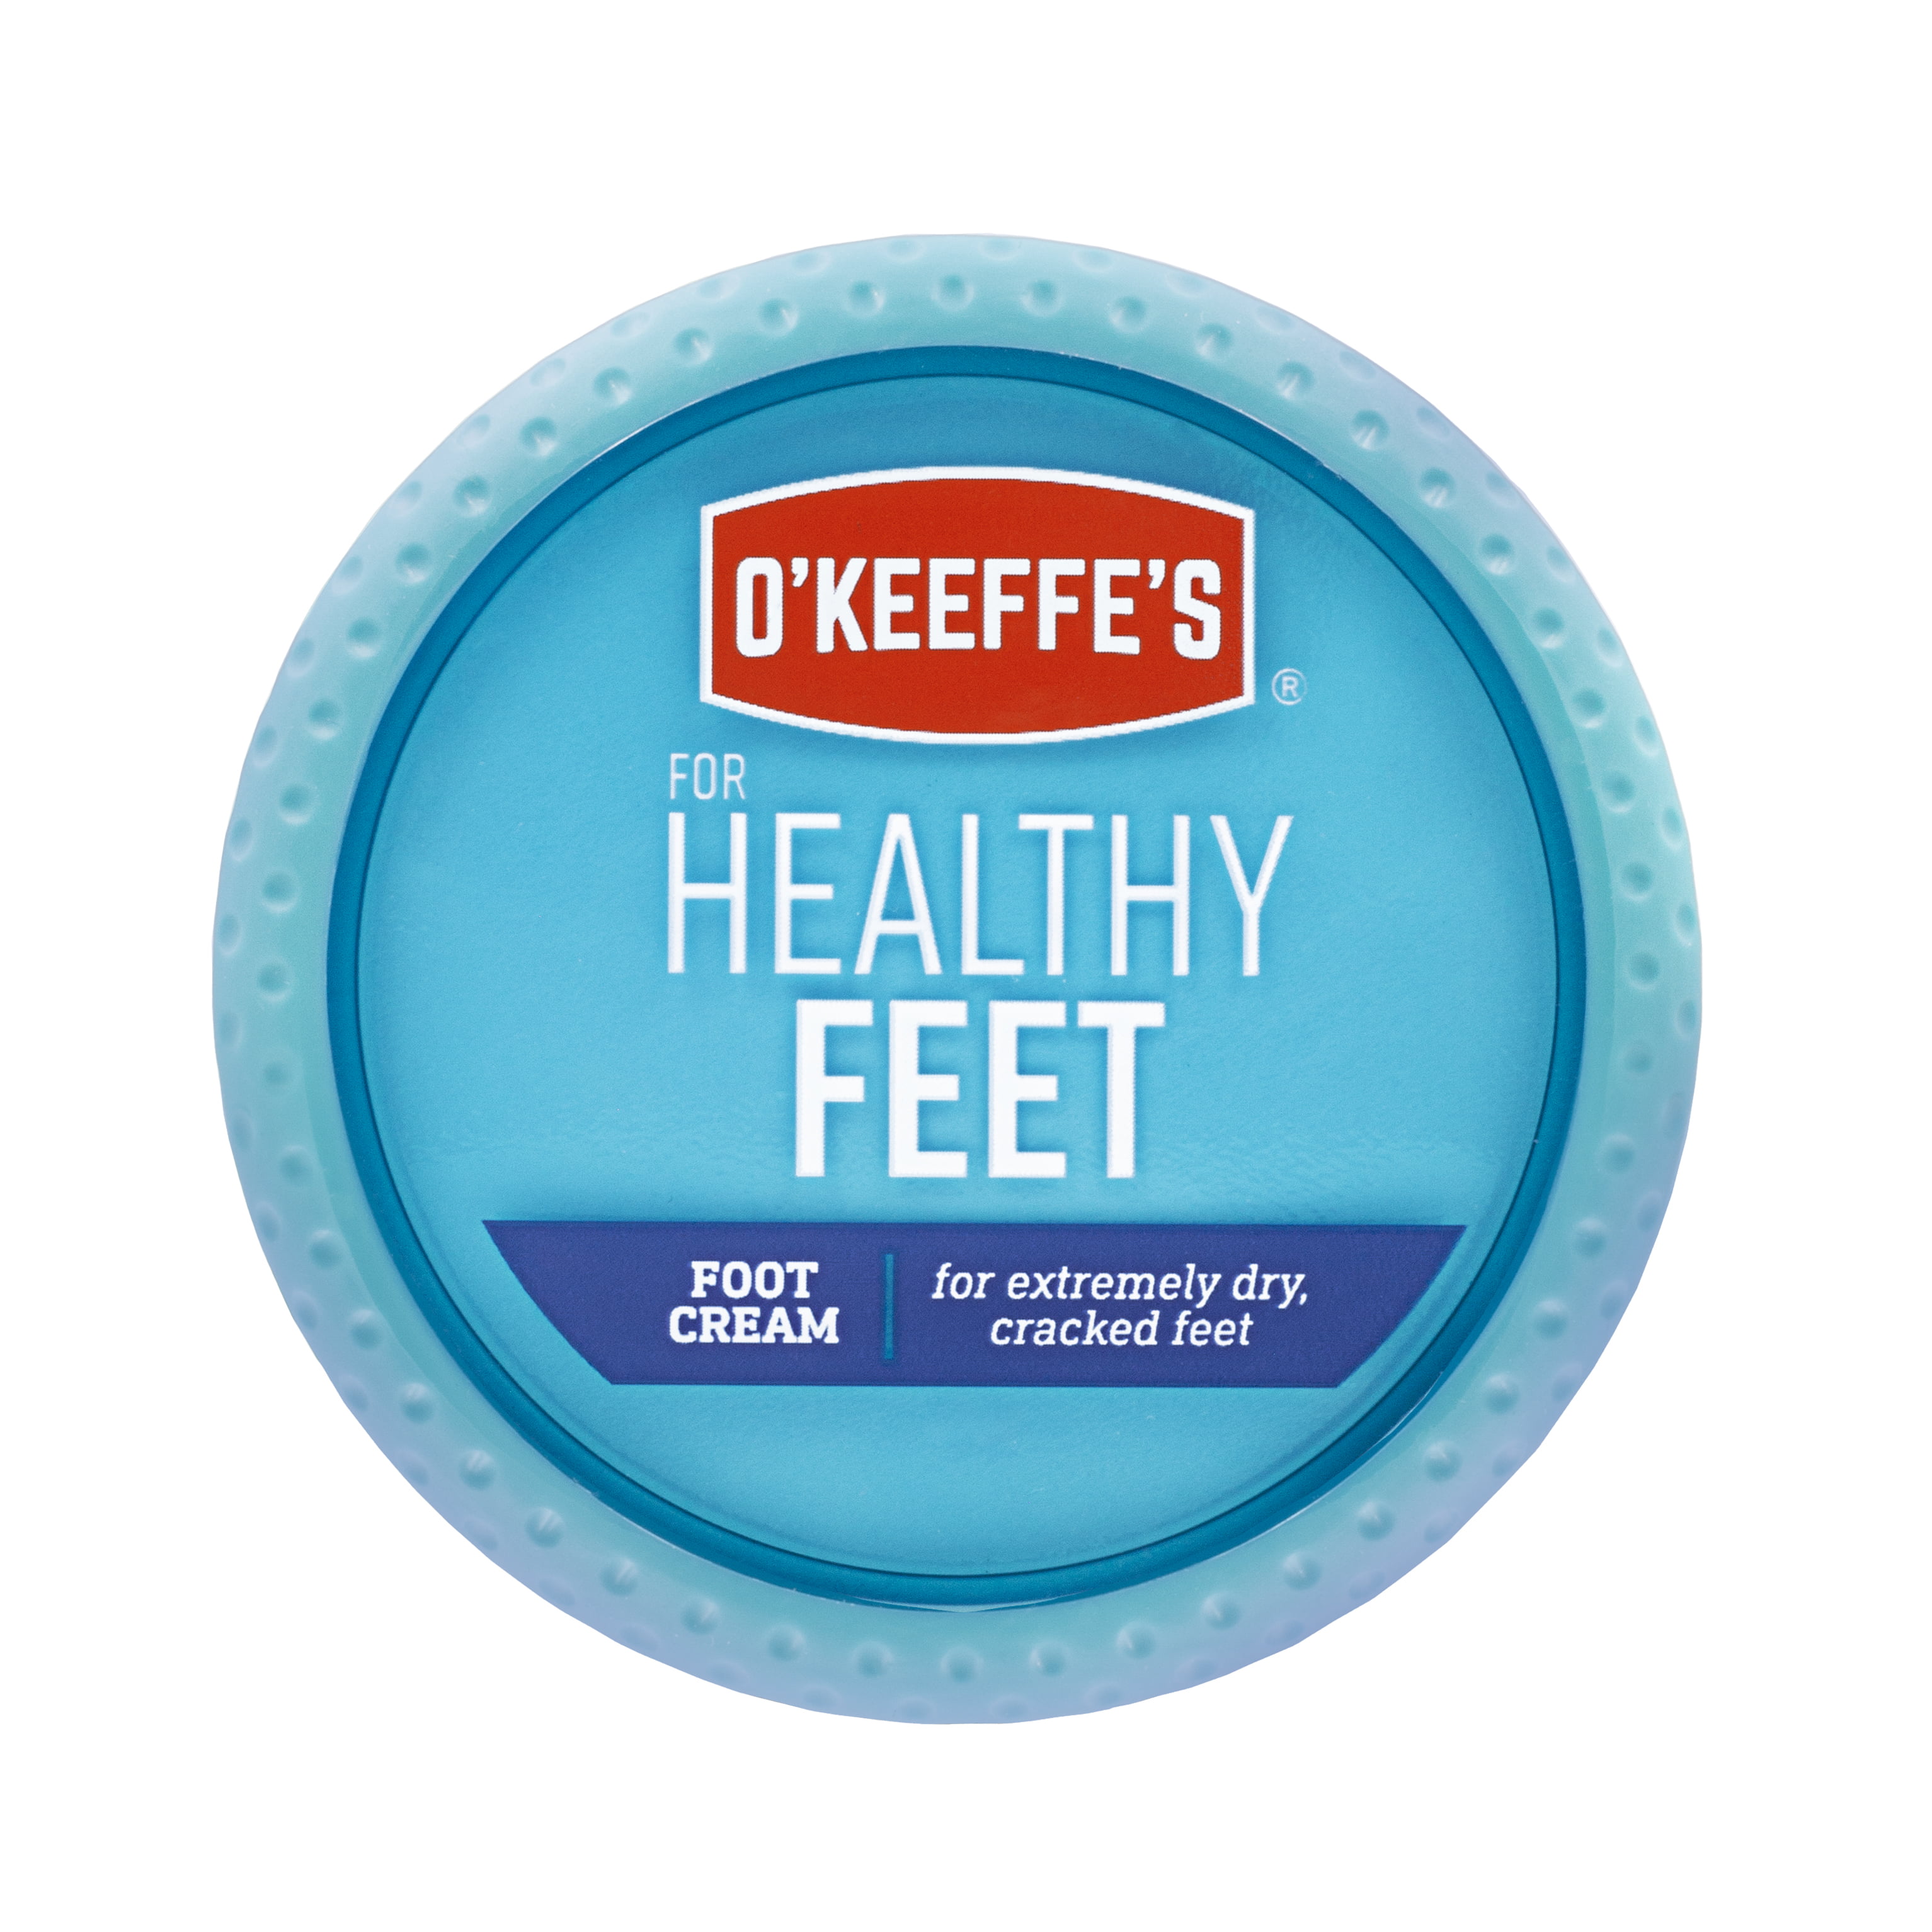 O'Keeffe's for Healthy Feet Cream (2.7 oz.) Jar for Extremely Dry